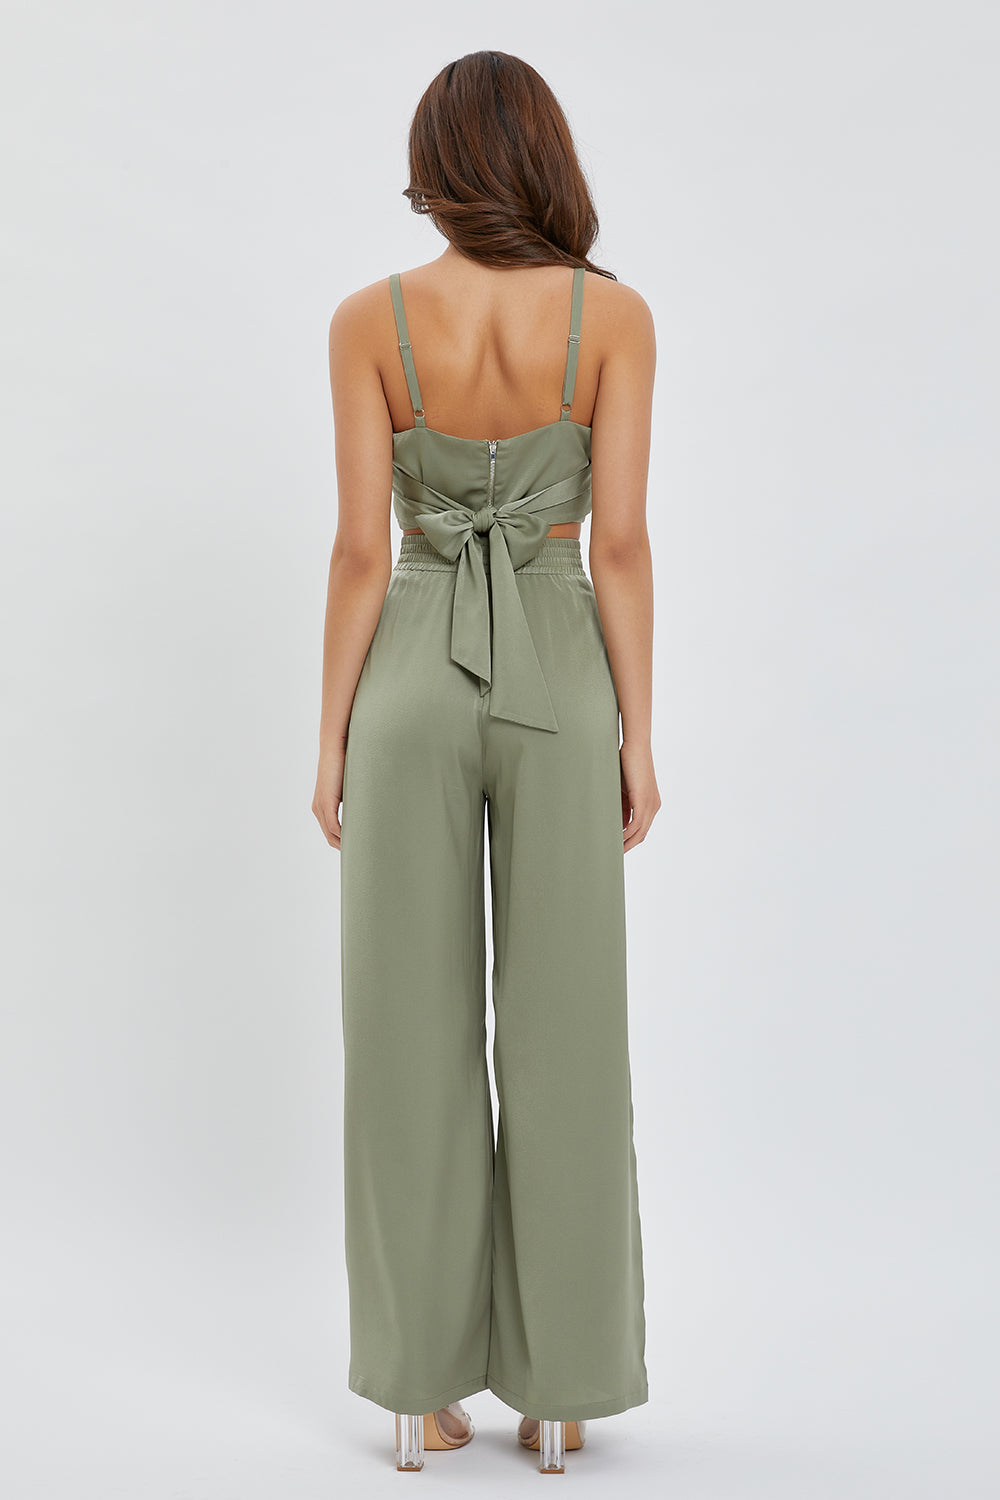 Twisted Front Crop Top & Wide Leg Pants